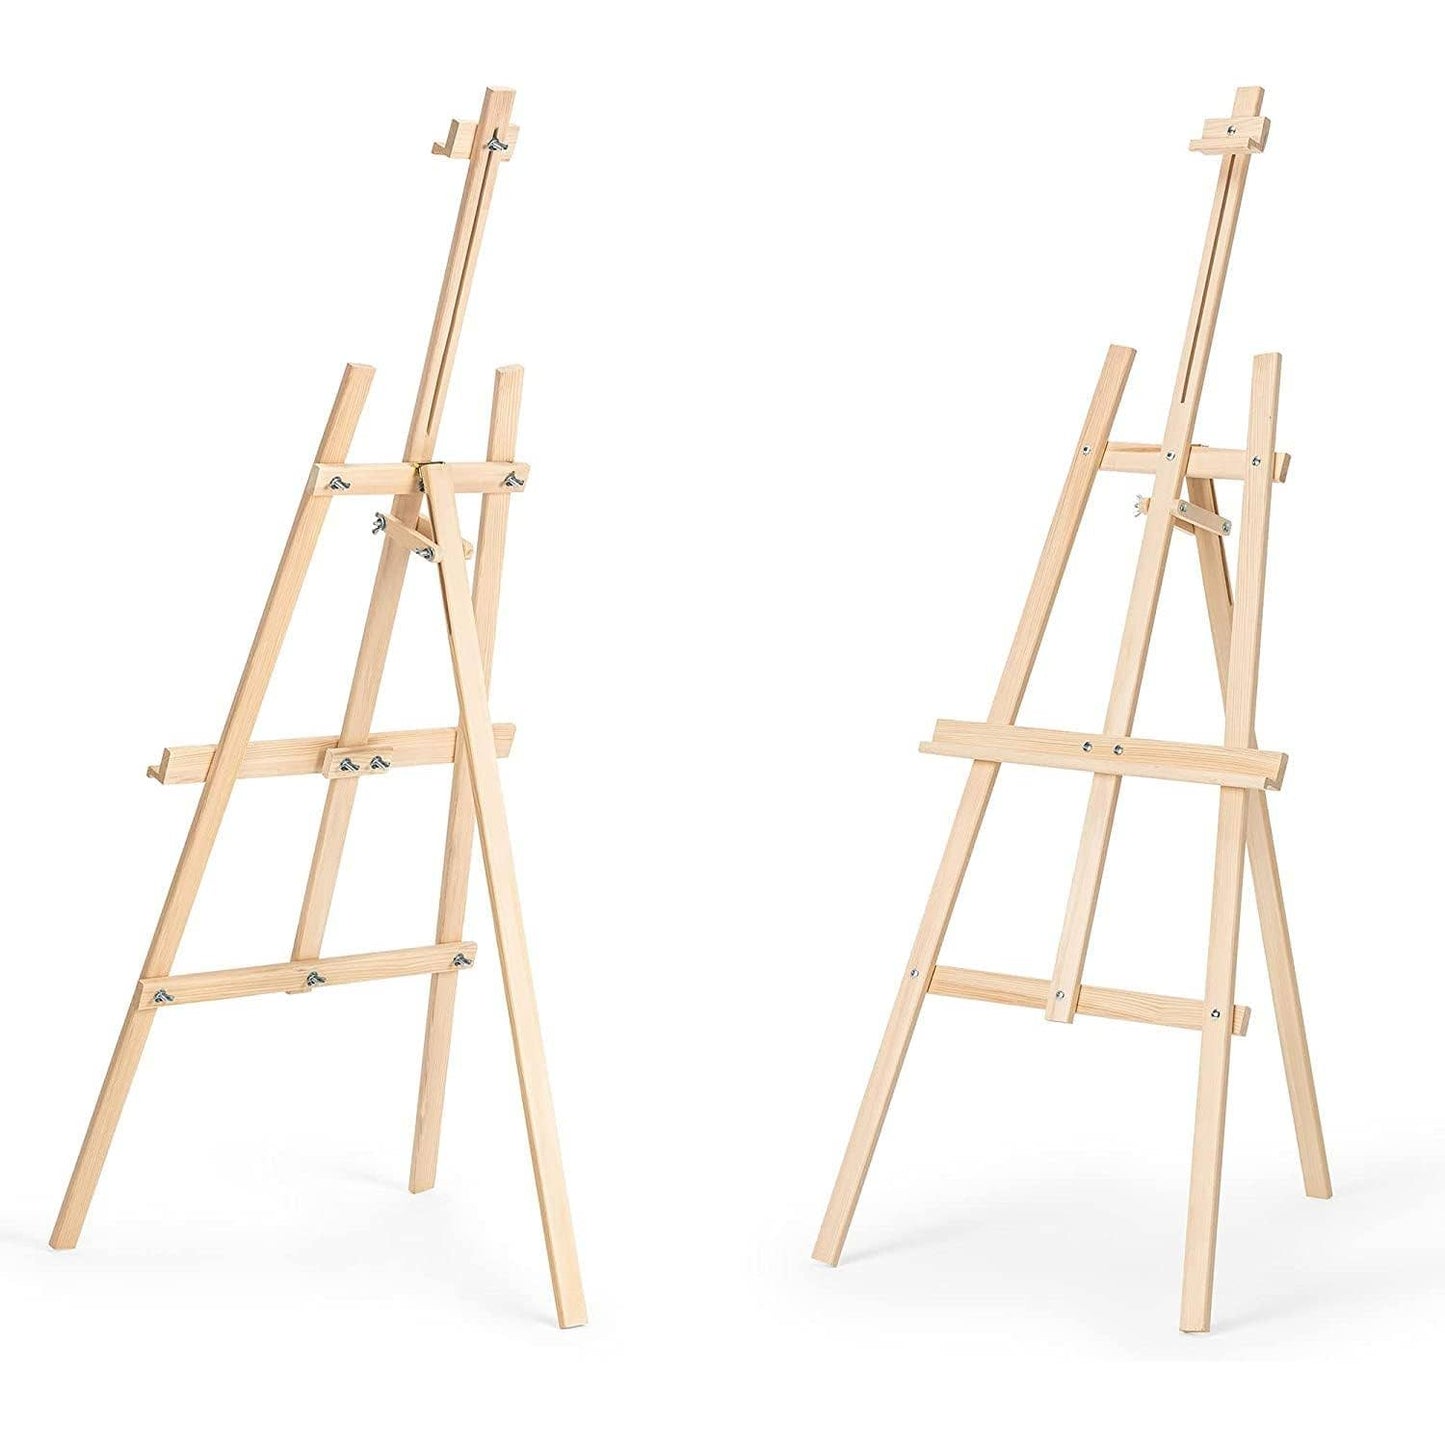 Dezozo Wooden Easel for Canvas or signage 43.3 inches tall